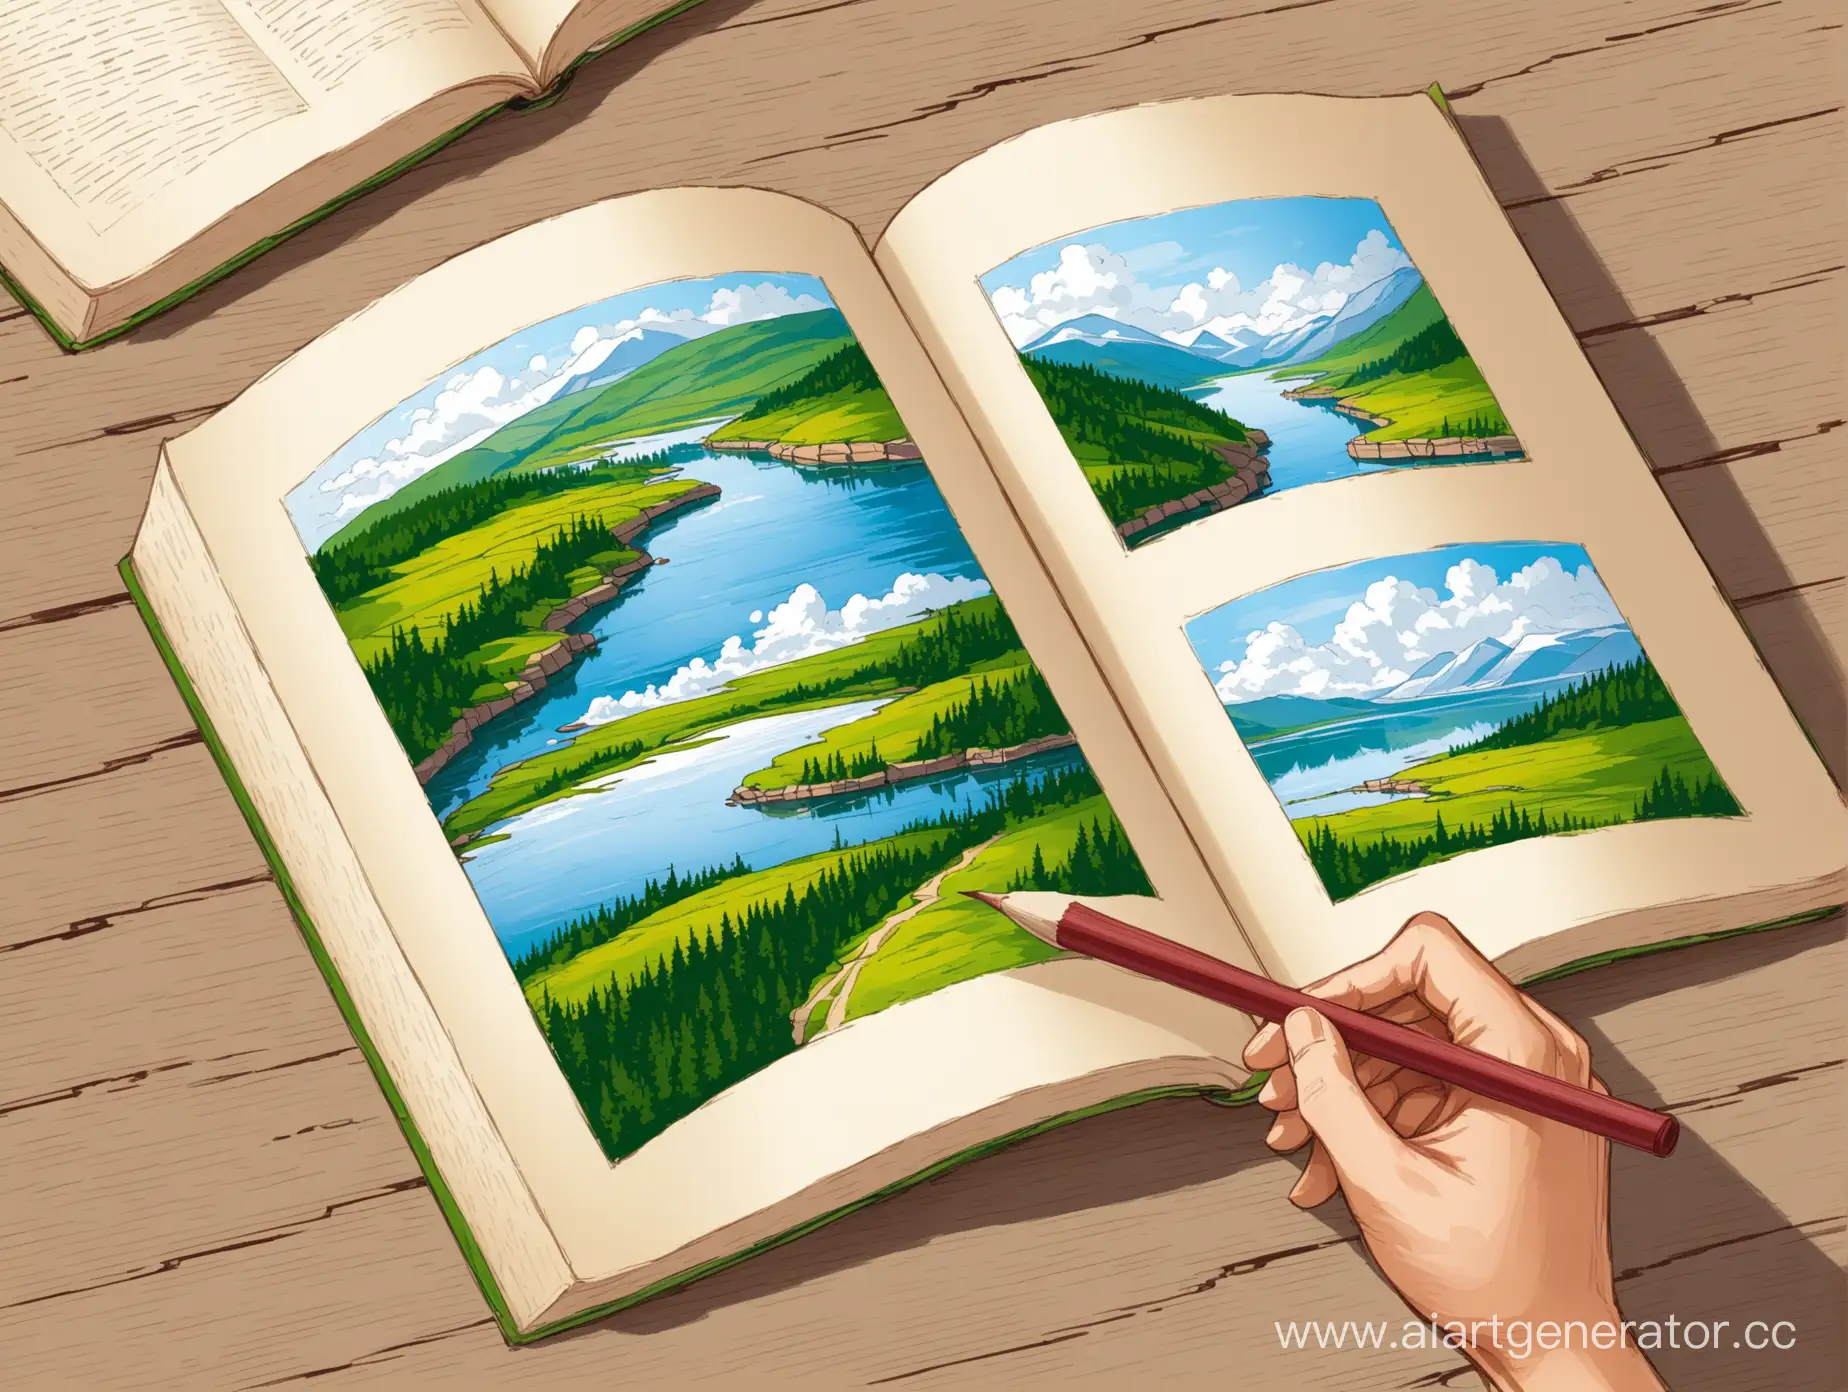 Open-Primer-with-Russian-Landscapes-Educational-Illustration-for-Geography-Learning